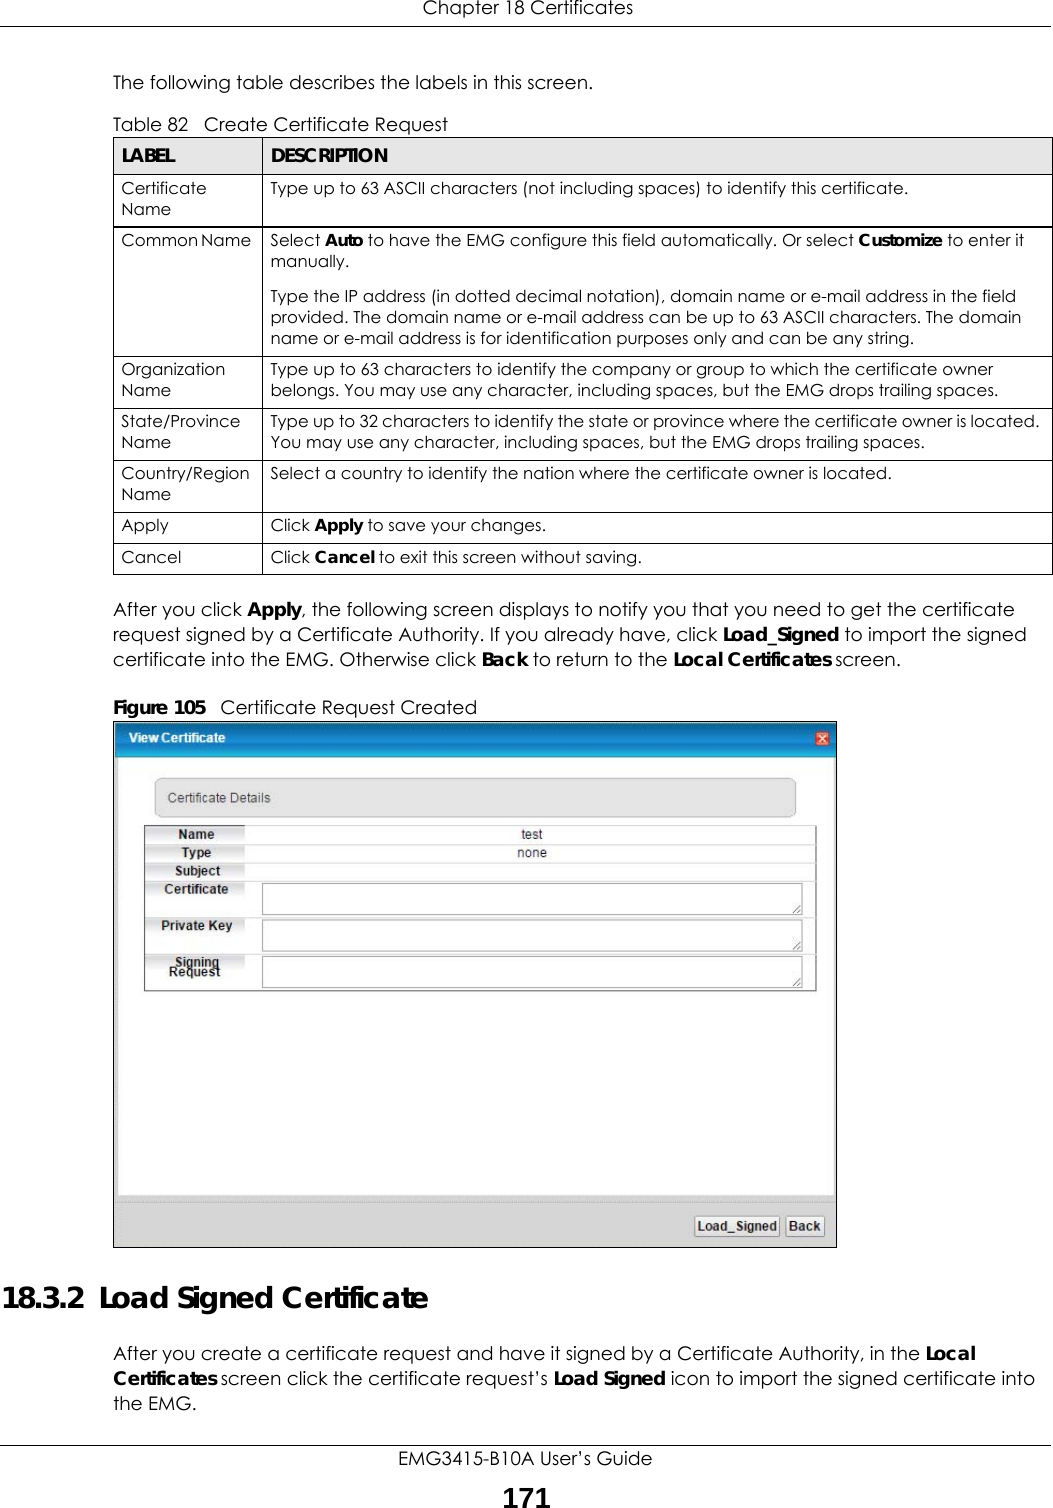  Chapter 18 CertificatesEMG3415-B10A User’s Guide171The following table describes the labels in this screen. After you click Apply, the following screen displays to notify you that you need to get the certificate request signed by a Certificate Authority. If you already have, click Load_Signed to import the signed certificate into the EMG. Otherwise click Back to return to the Local Certificates screen. Figure 105   Certificate Request Created18.3.2  Load Signed Certificate After you create a certificate request and have it signed by a Certificate Authority, in the Local Certificates screen click the certificate request’s Load Signed icon to import the signed certificate into the EMG. Table 82   Create Certificate RequestLABEL DESCRIPTIONCertificate NameType up to 63 ASCII characters (not including spaces) to identify this certificate. Common Name  Select Auto to have the EMG configure this field automatically. Or select Customize to enter it manually. Type the IP address (in dotted decimal notation), domain name or e-mail address in the field provided. The domain name or e-mail address can be up to 63 ASCII characters. The domain name or e-mail address is for identification purposes only and can be any string.Organization NameType up to 63 characters to identify the company or group to which the certificate owner belongs. You may use any character, including spaces, but the EMG drops trailing spaces.State/Province NameType up to 32 characters to identify the state or province where the certificate owner is located. You may use any character, including spaces, but the EMG drops trailing spaces.Country/Region NameSelect a country to identify the nation where the certificate owner is located. Apply Click Apply to save your changes.Cancel Click Cancel to exit this screen without saving.